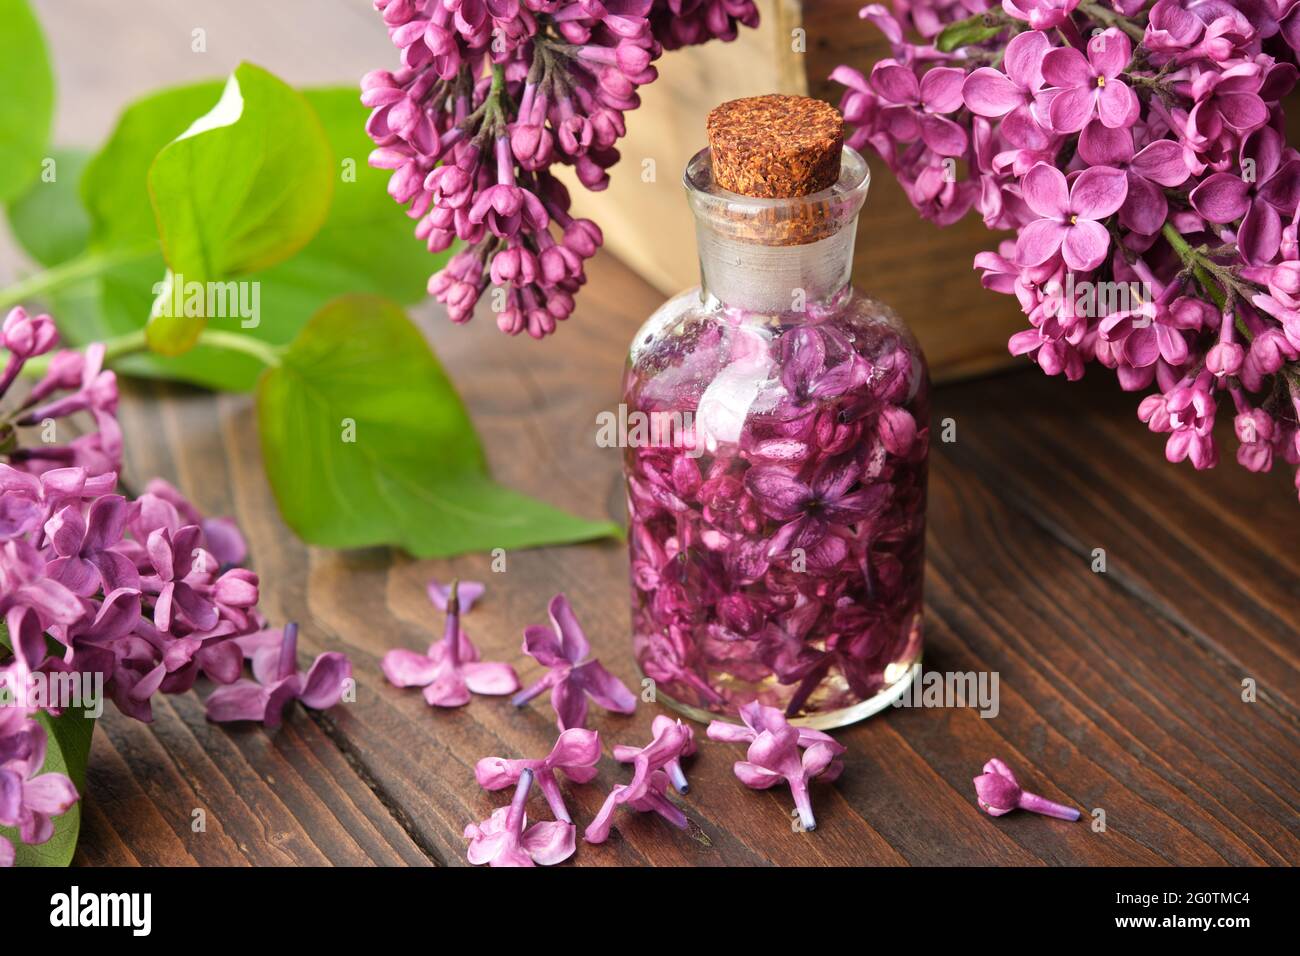 Lilac essential oil or infusion bottle. Blossom lilac drink or extract. Syringa flowers on background. Stock Photo